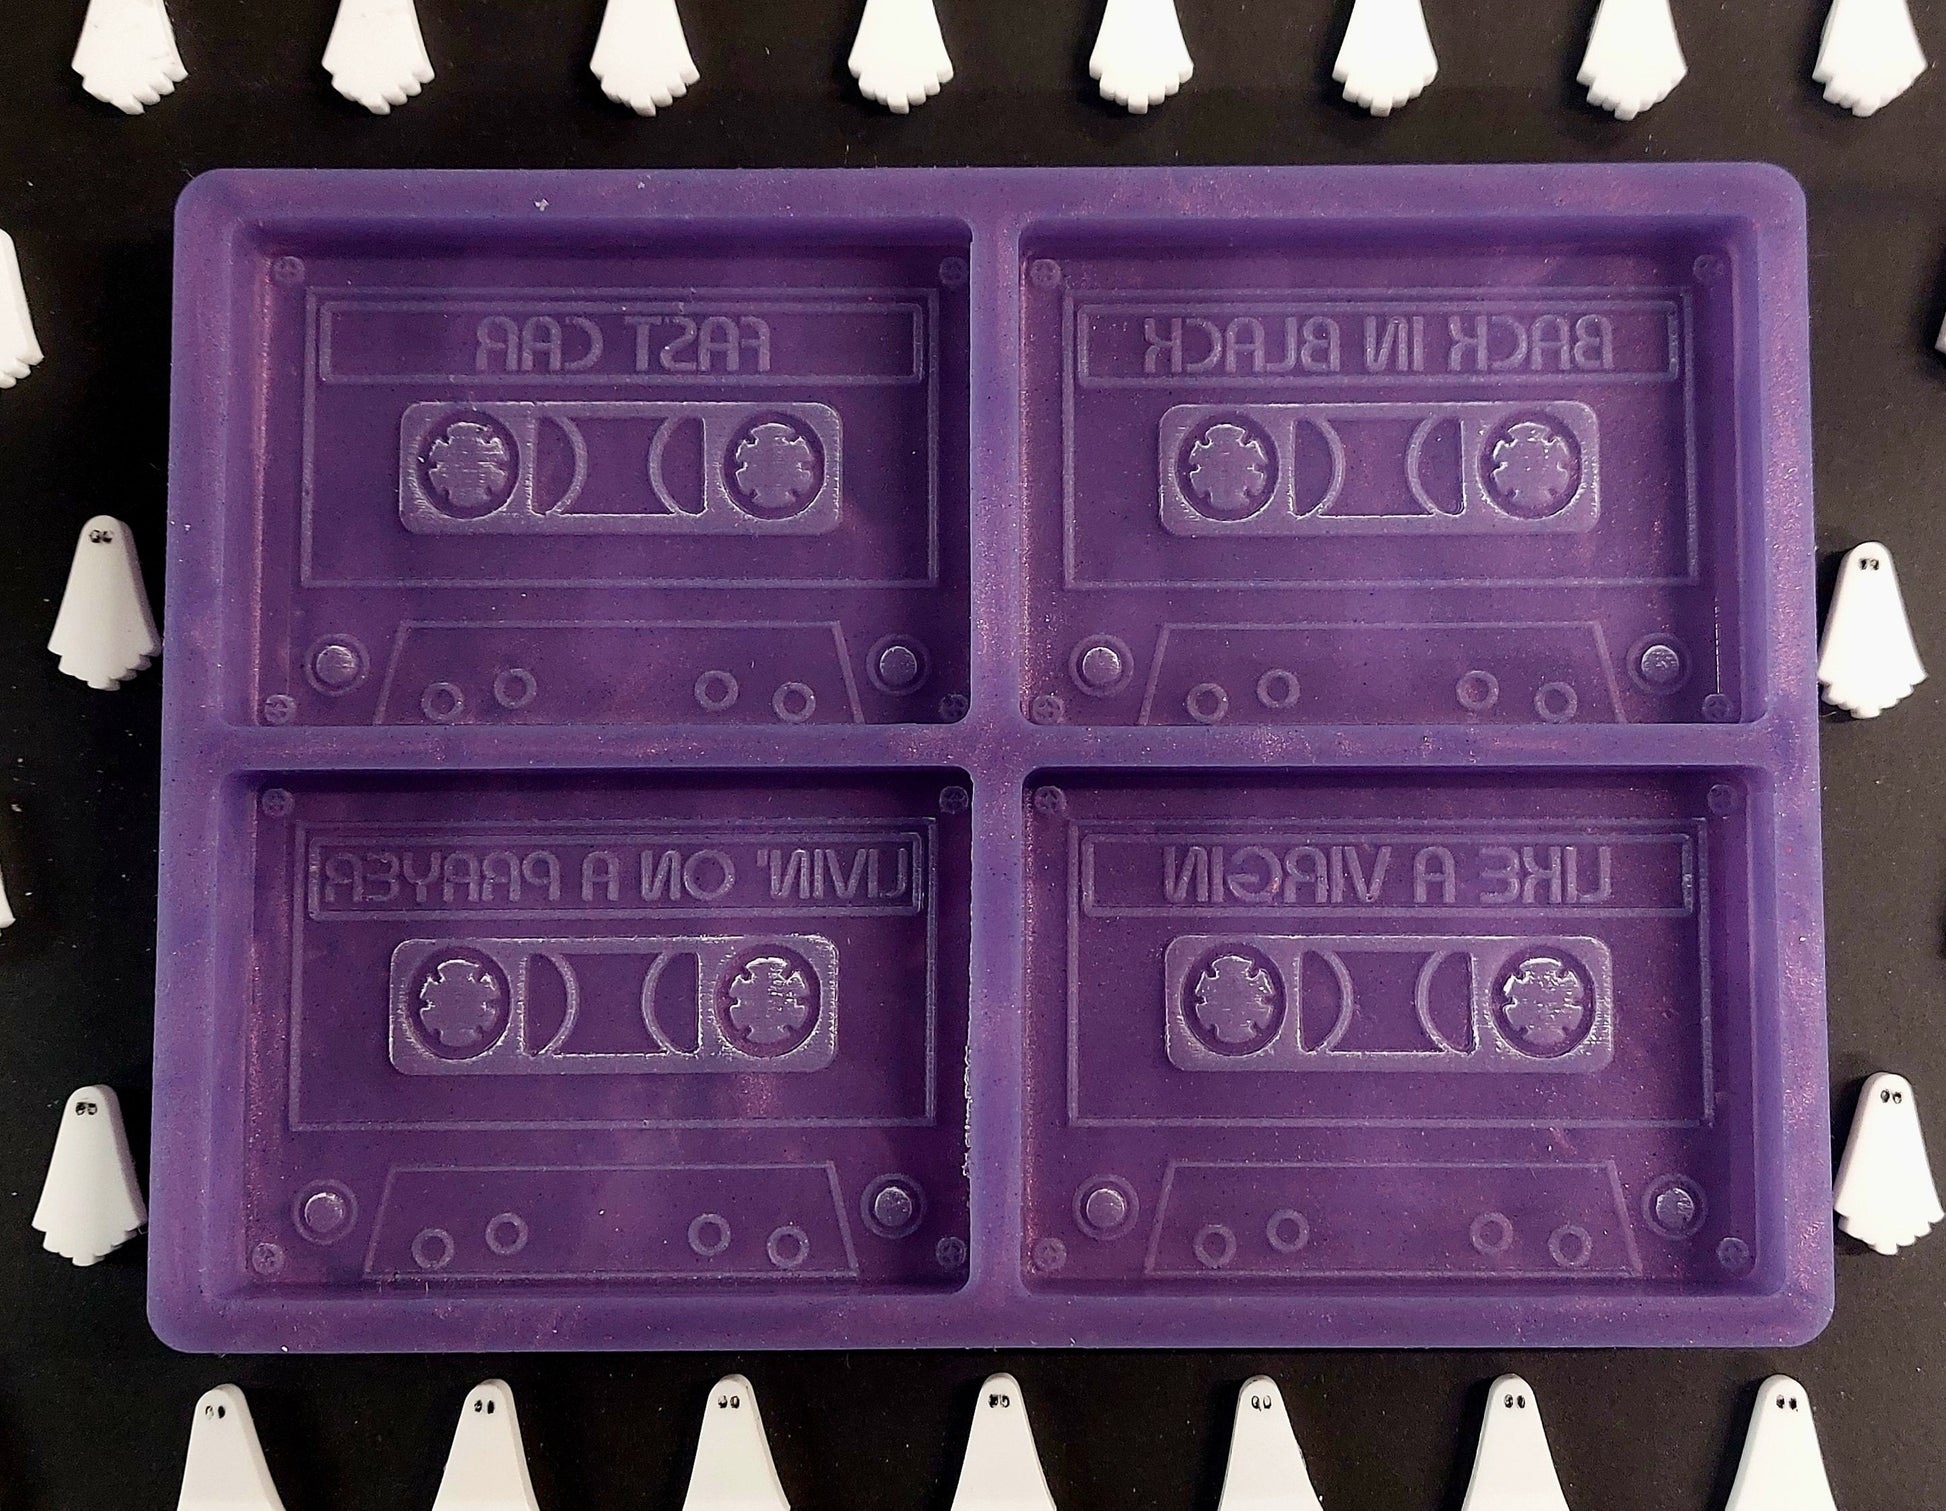 80s Cassette Tape Mould for wax, resin, soap etc